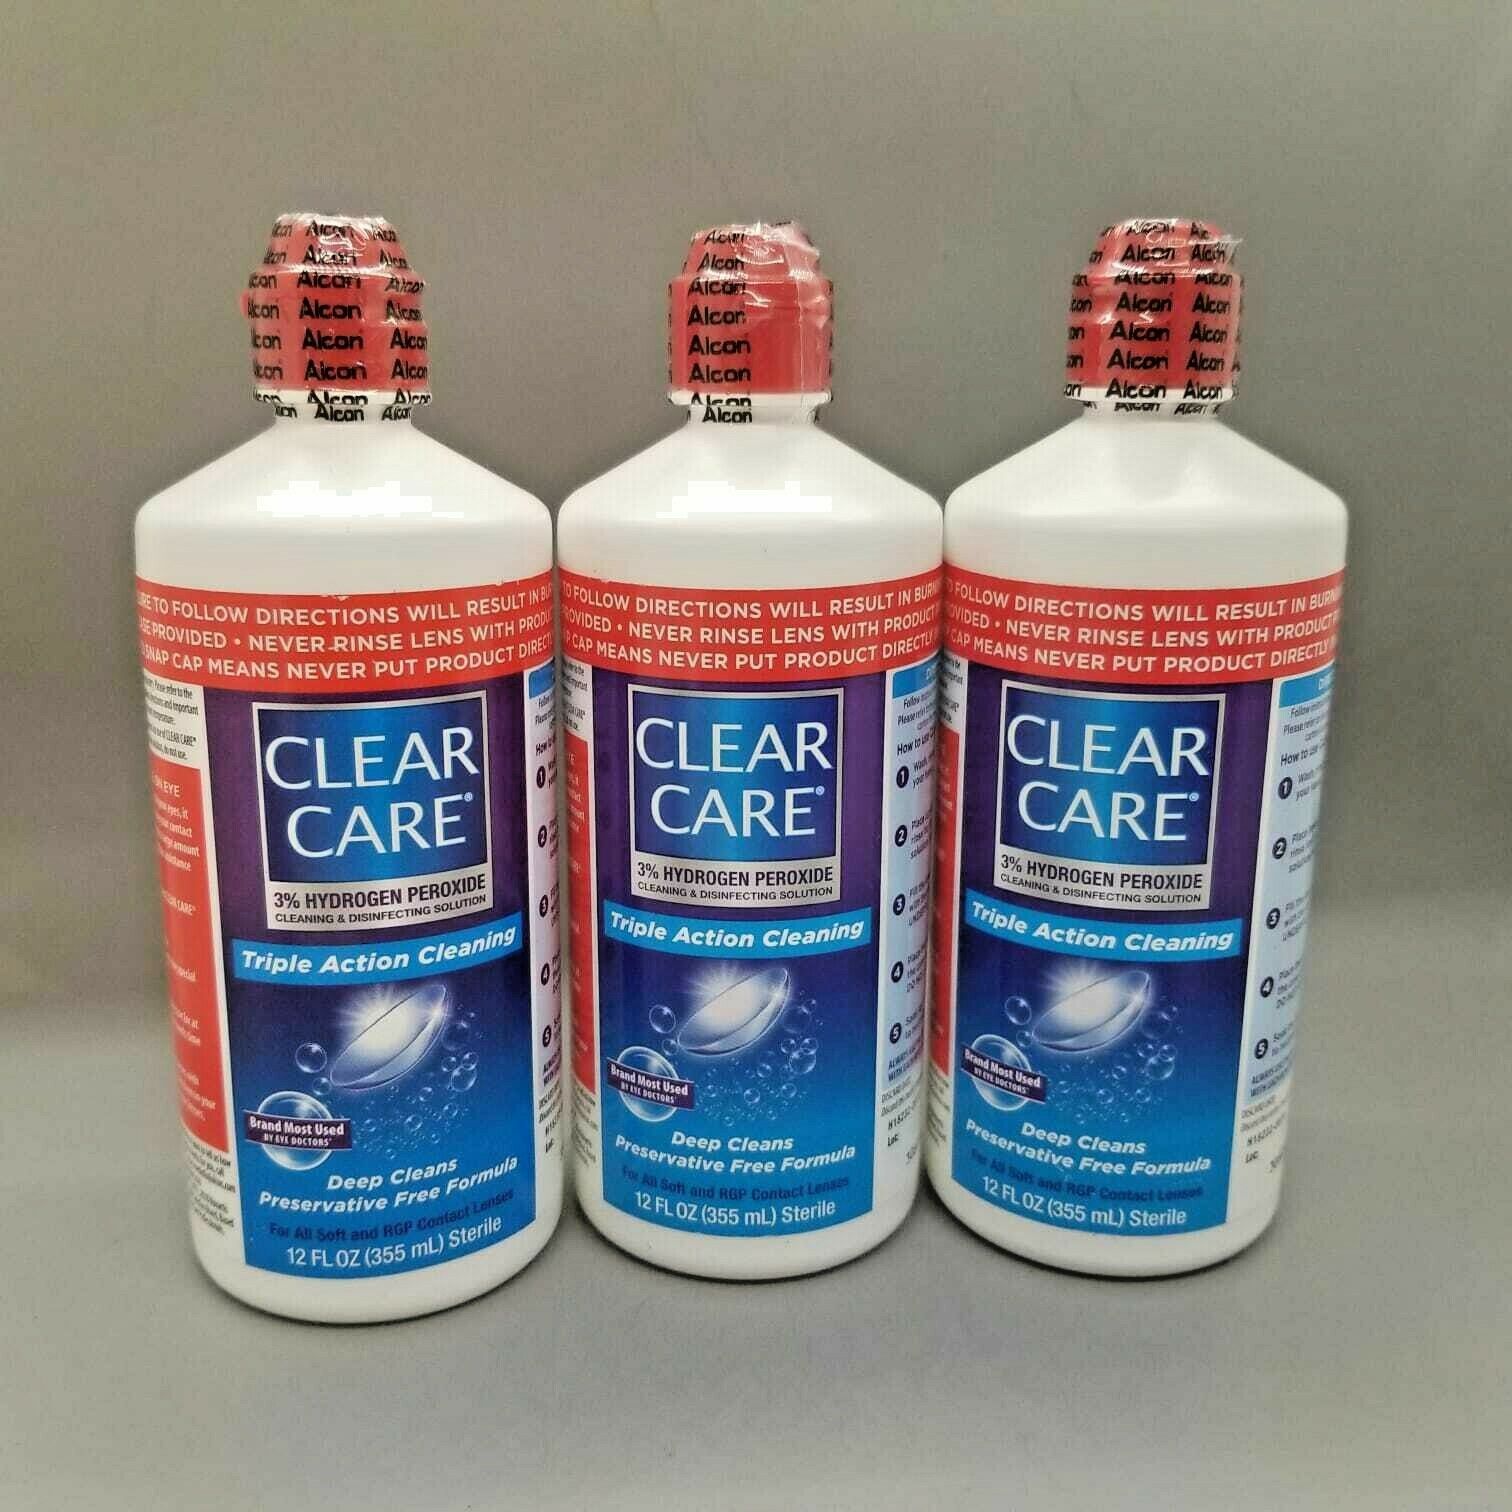 Clear Care Triple Action Cleaning 3% Hydrogen Peroxide 12 Fl Oz 3pk Exp 11/21+